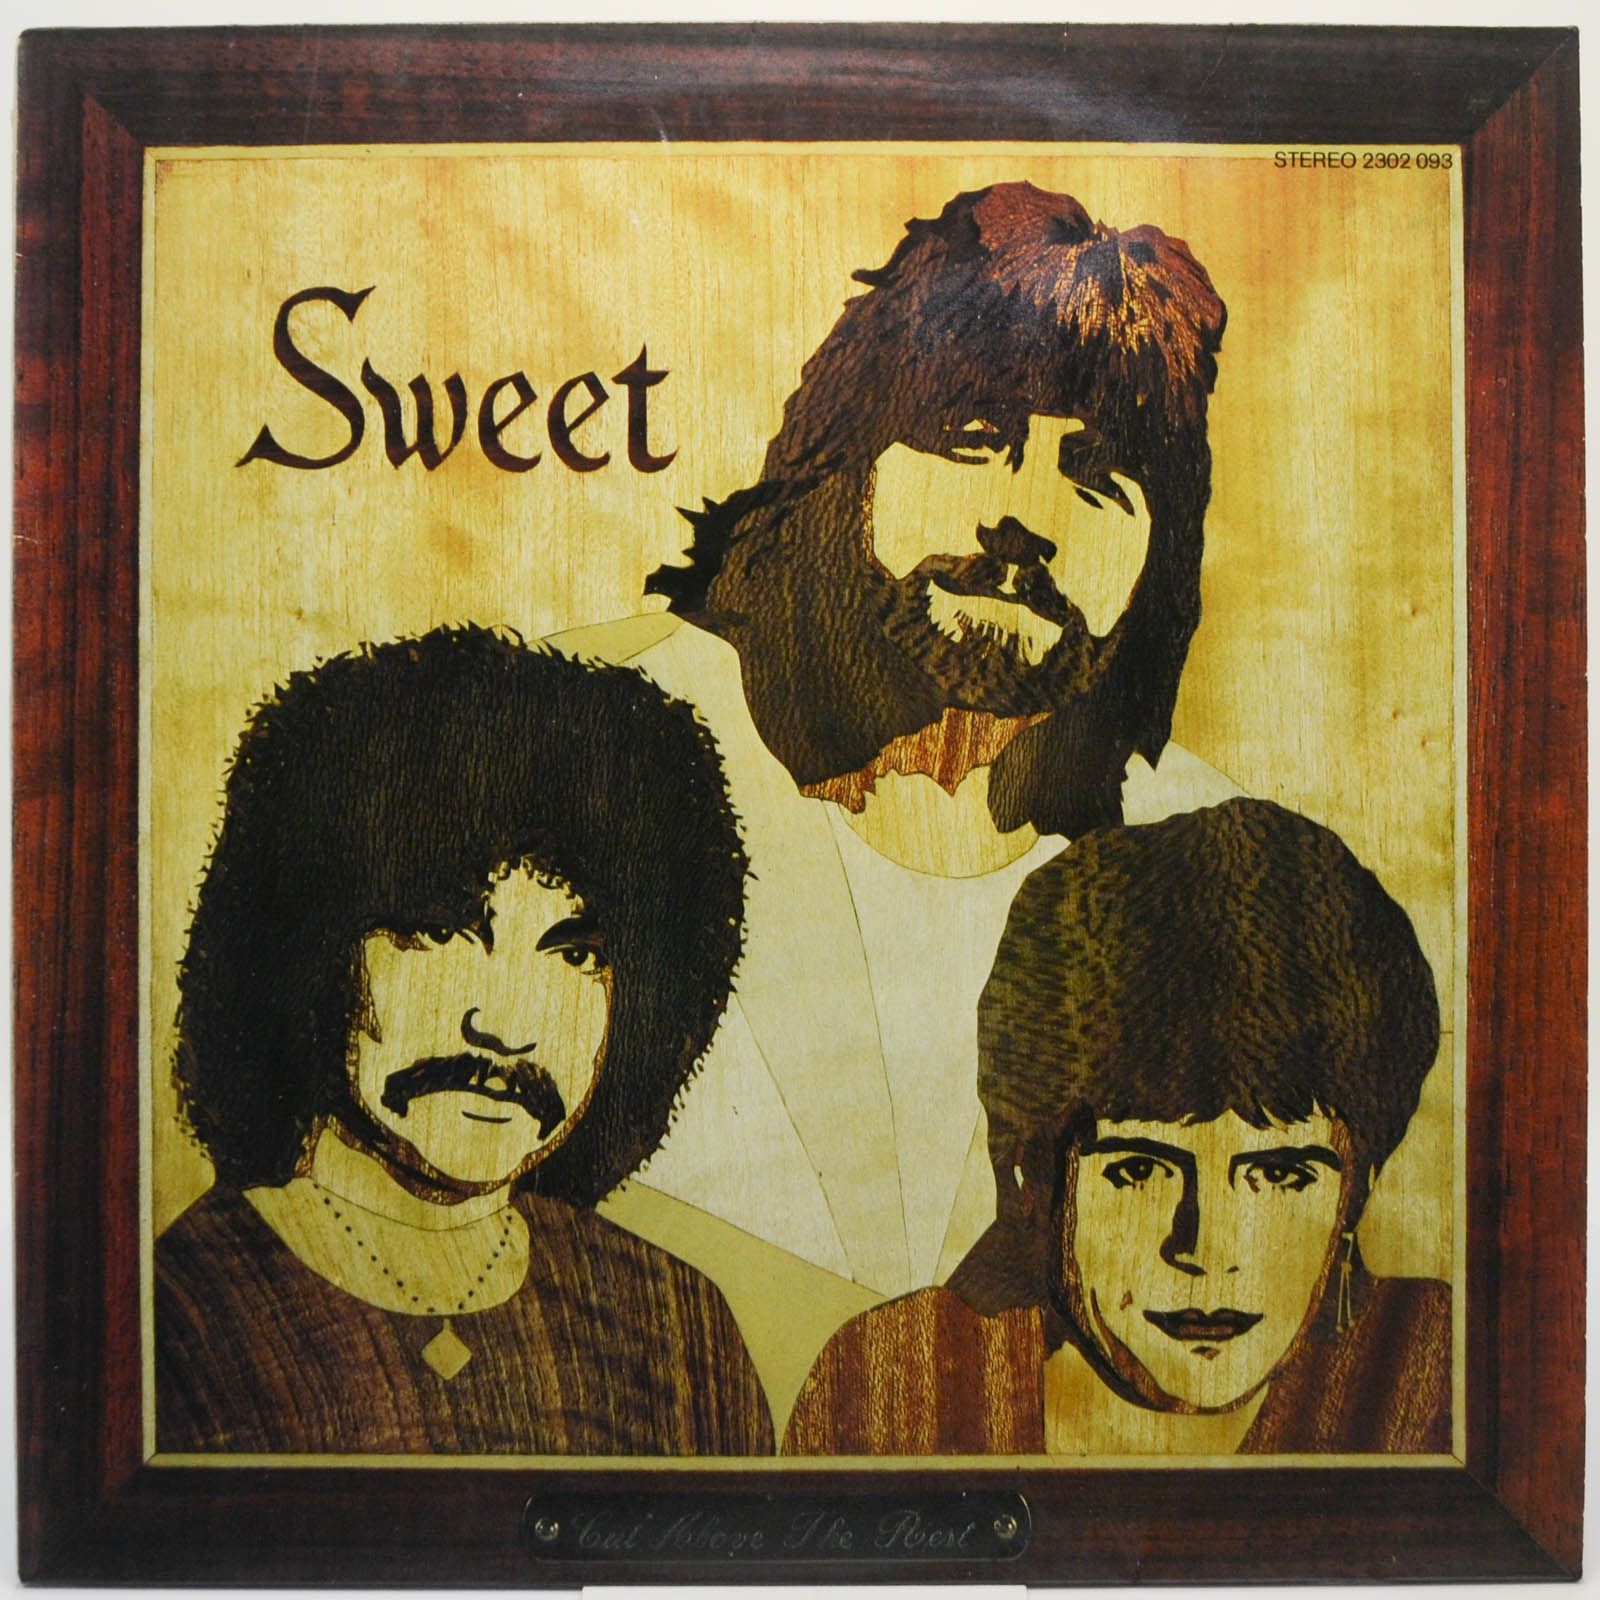 Sweet — Cut Above The Rest, 1979